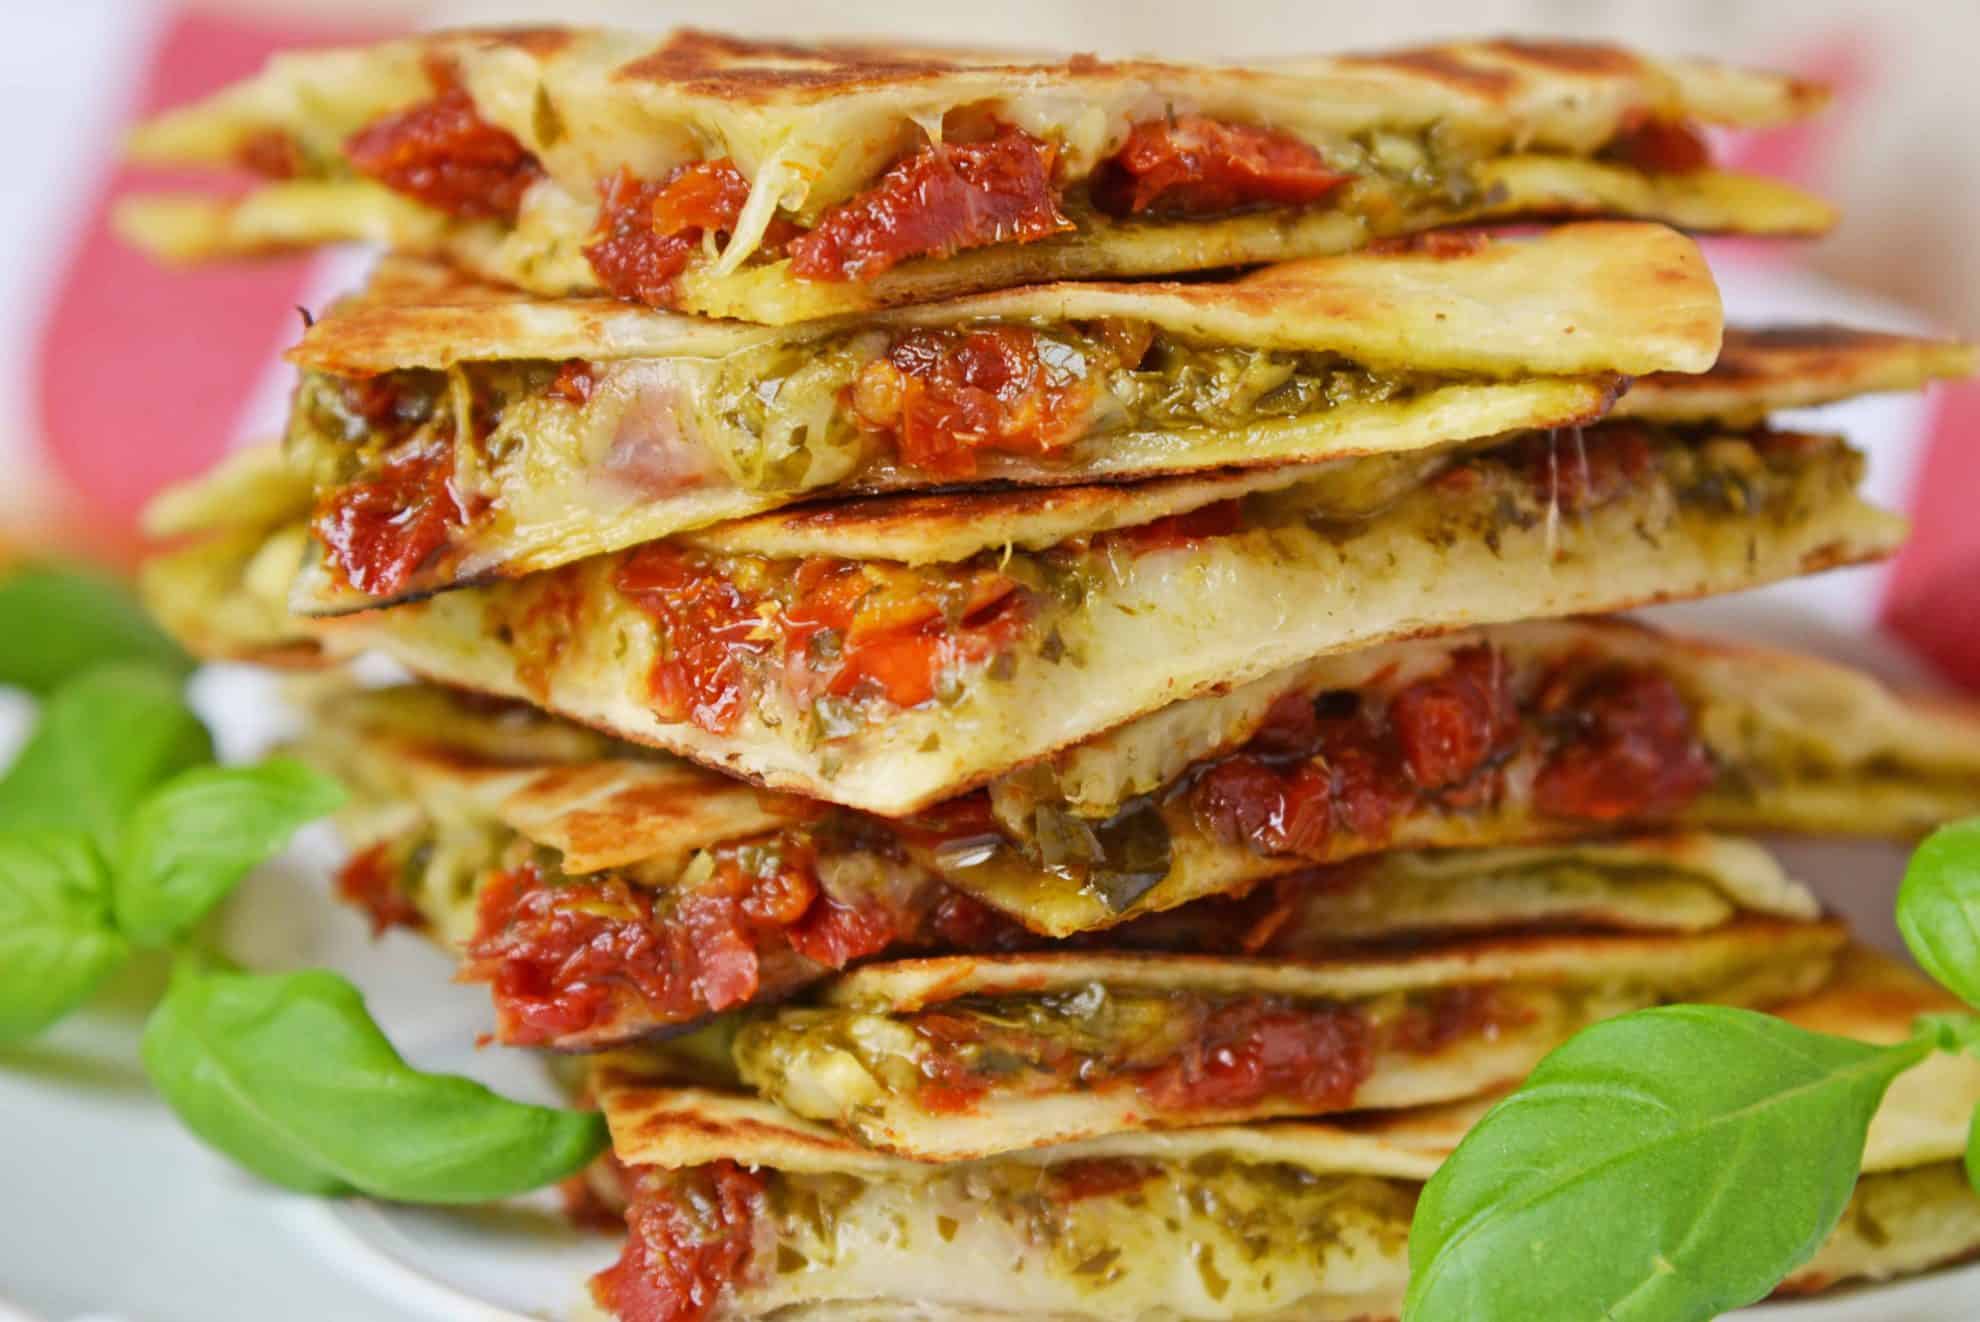 Caprese Quesadillas combine homemade pesto sauce with sun dried tomatoes and gooey mozzarella cheese. Serve for lunch, dinner or even as a party appetizer! #quesadillarecipe #capresequesadilla www.savoryexperiments.com 